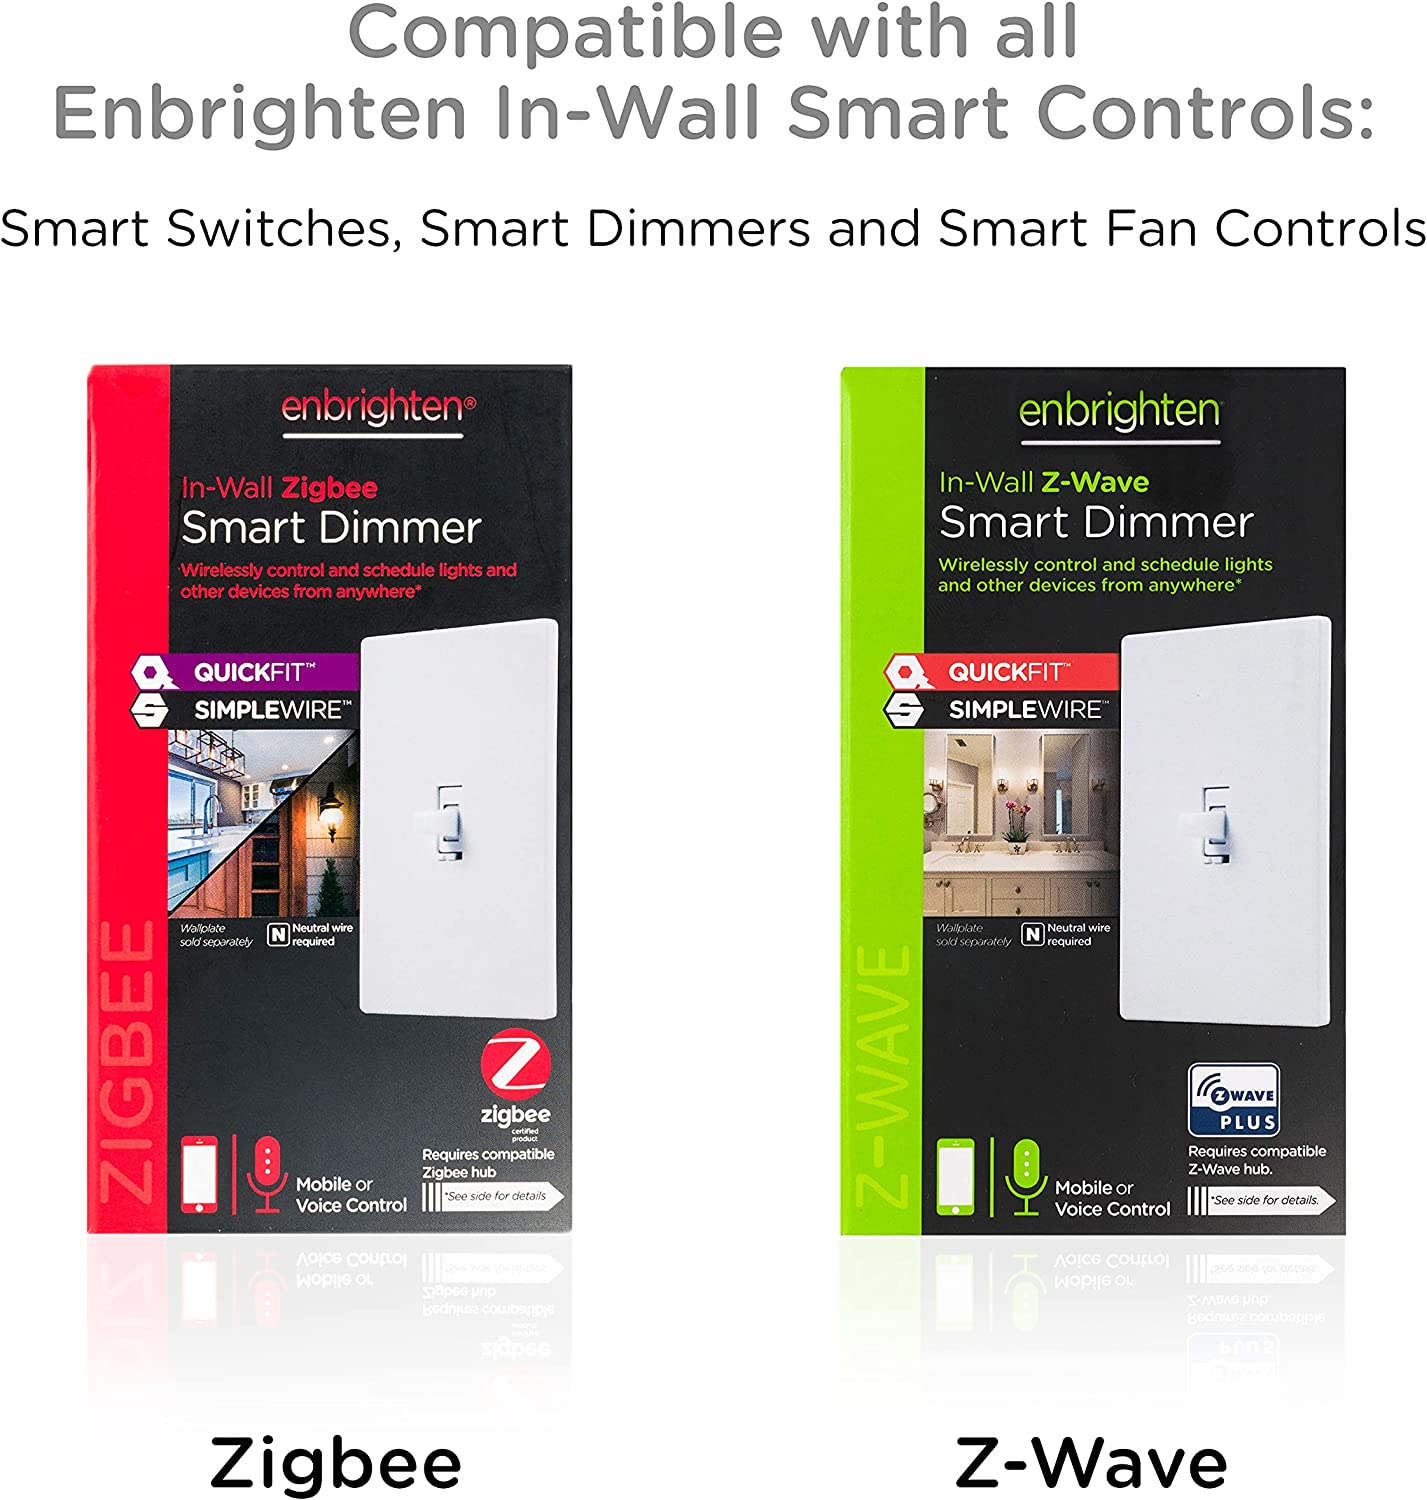 Enbrighten Add-On Switch QuickFit and SimpleWire, In-Wall Toggle, Z-Wave ZigBee Wireless Smart Lighting Controls, NOT A STANDALONE Switch, 46200